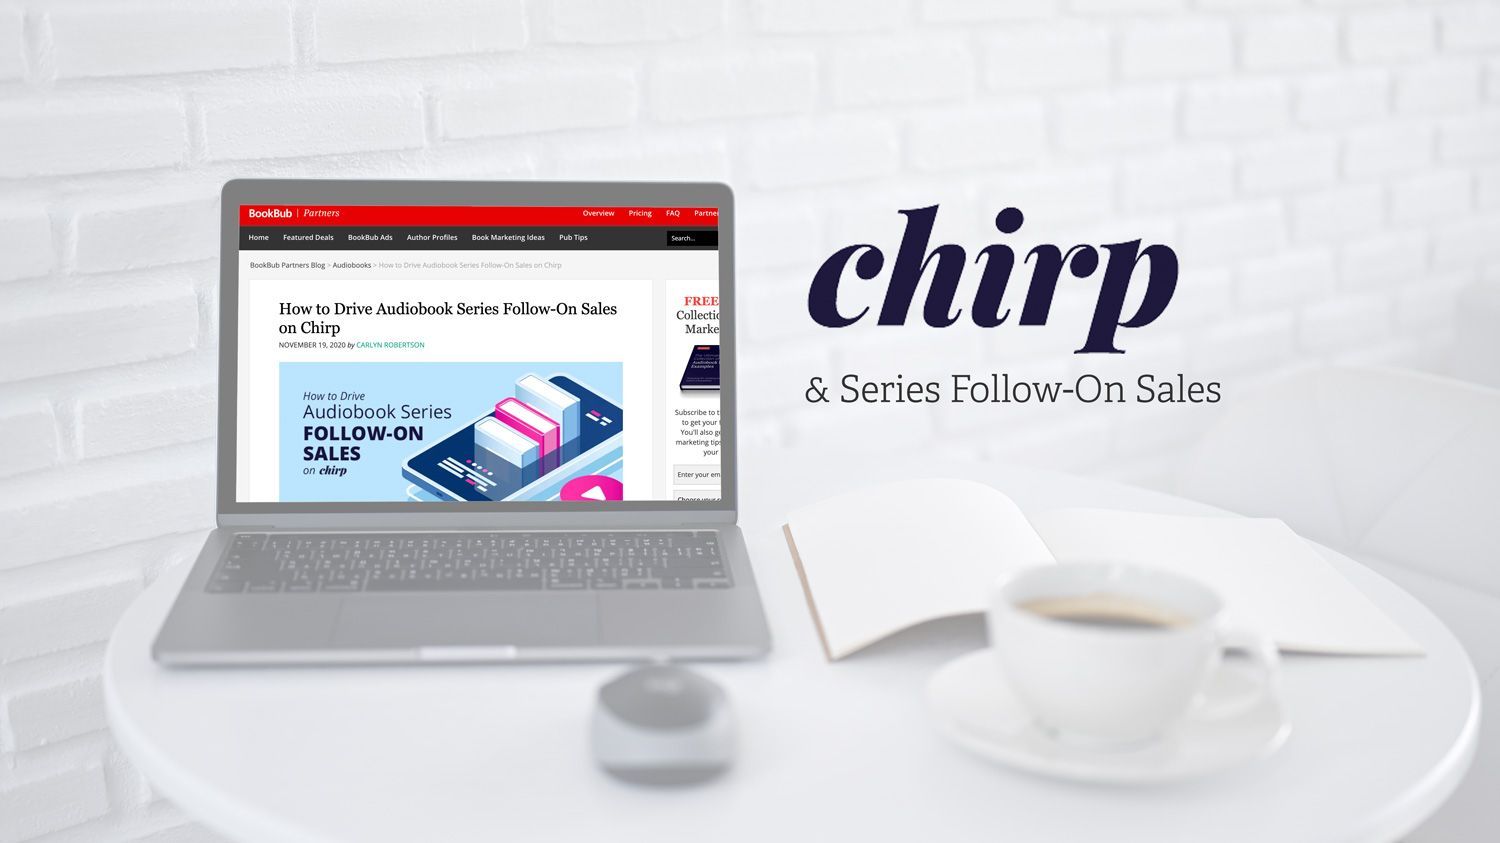 Driving Audiobook Series Follow-On Sales on Chirp